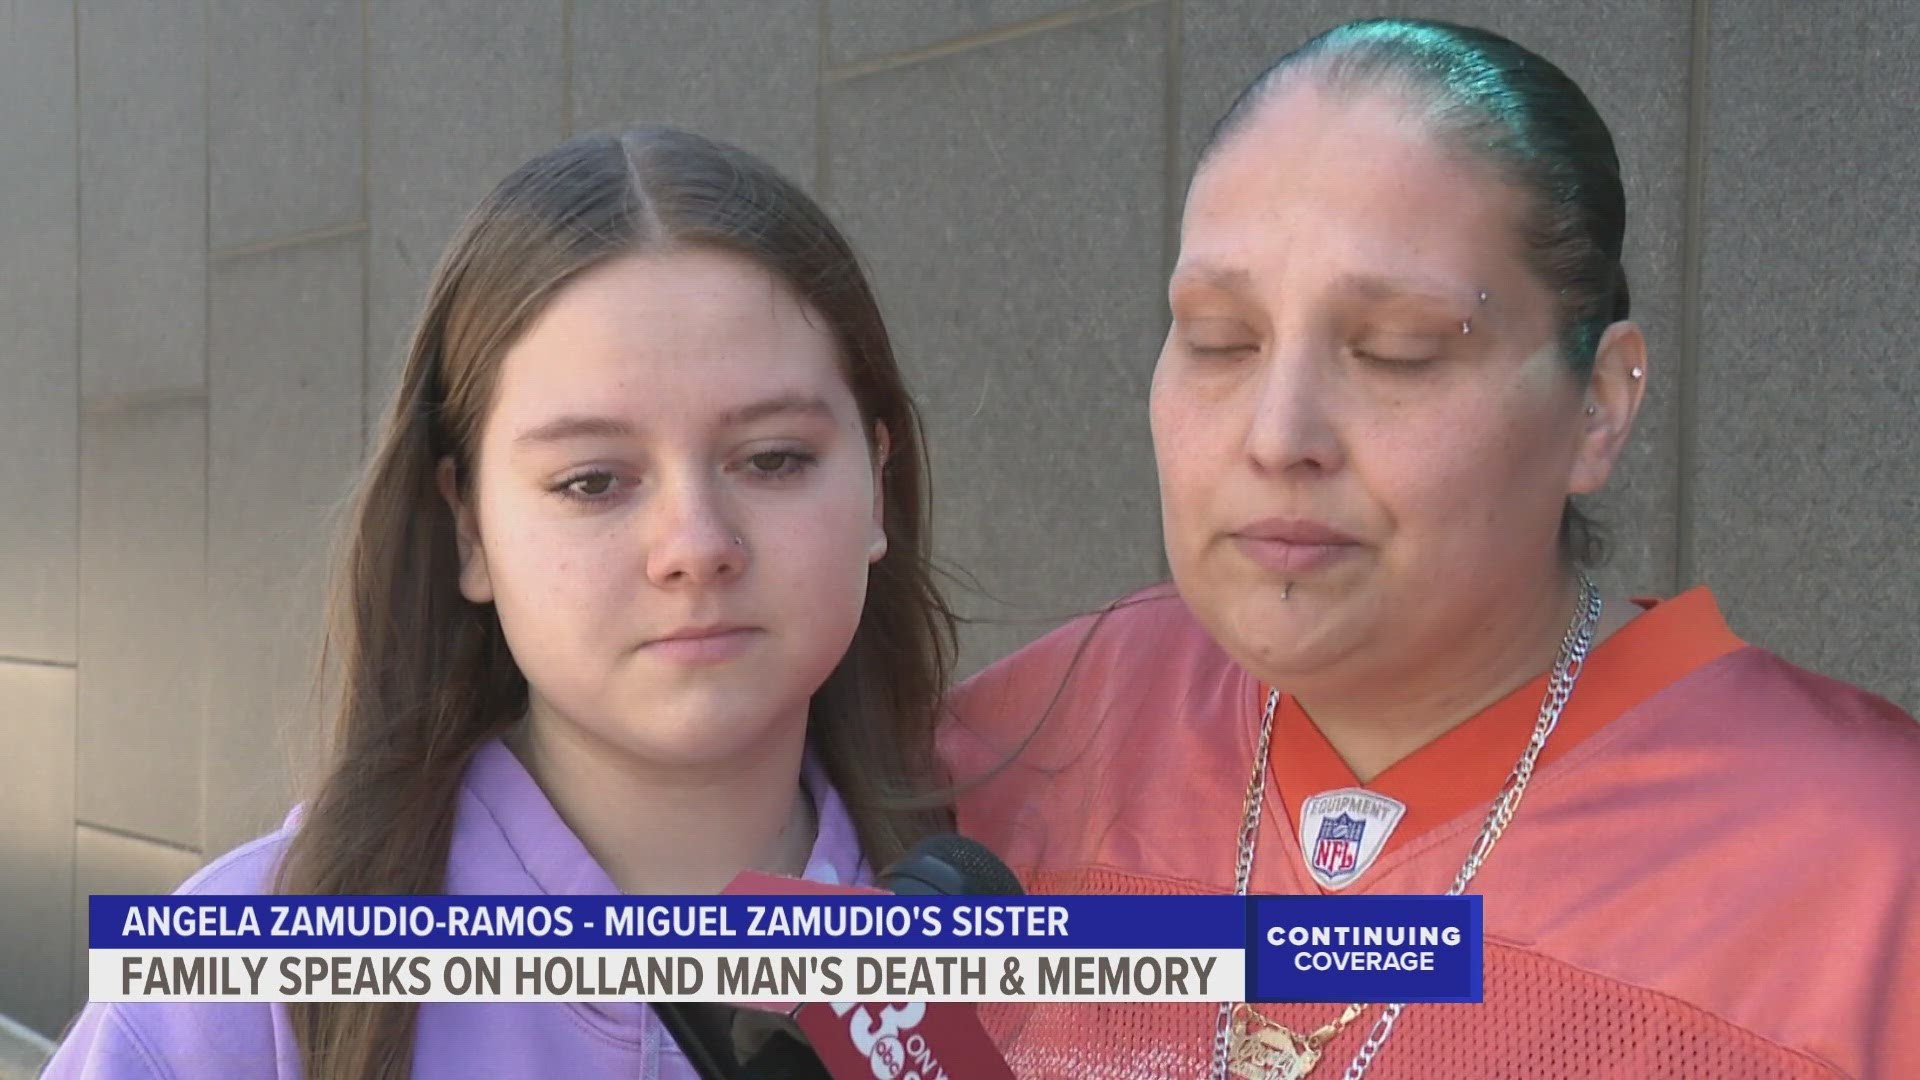 The family of a Holland man who was shot and killed by a stranger at a family get together spoke to 13 ON YOUR SIDE.